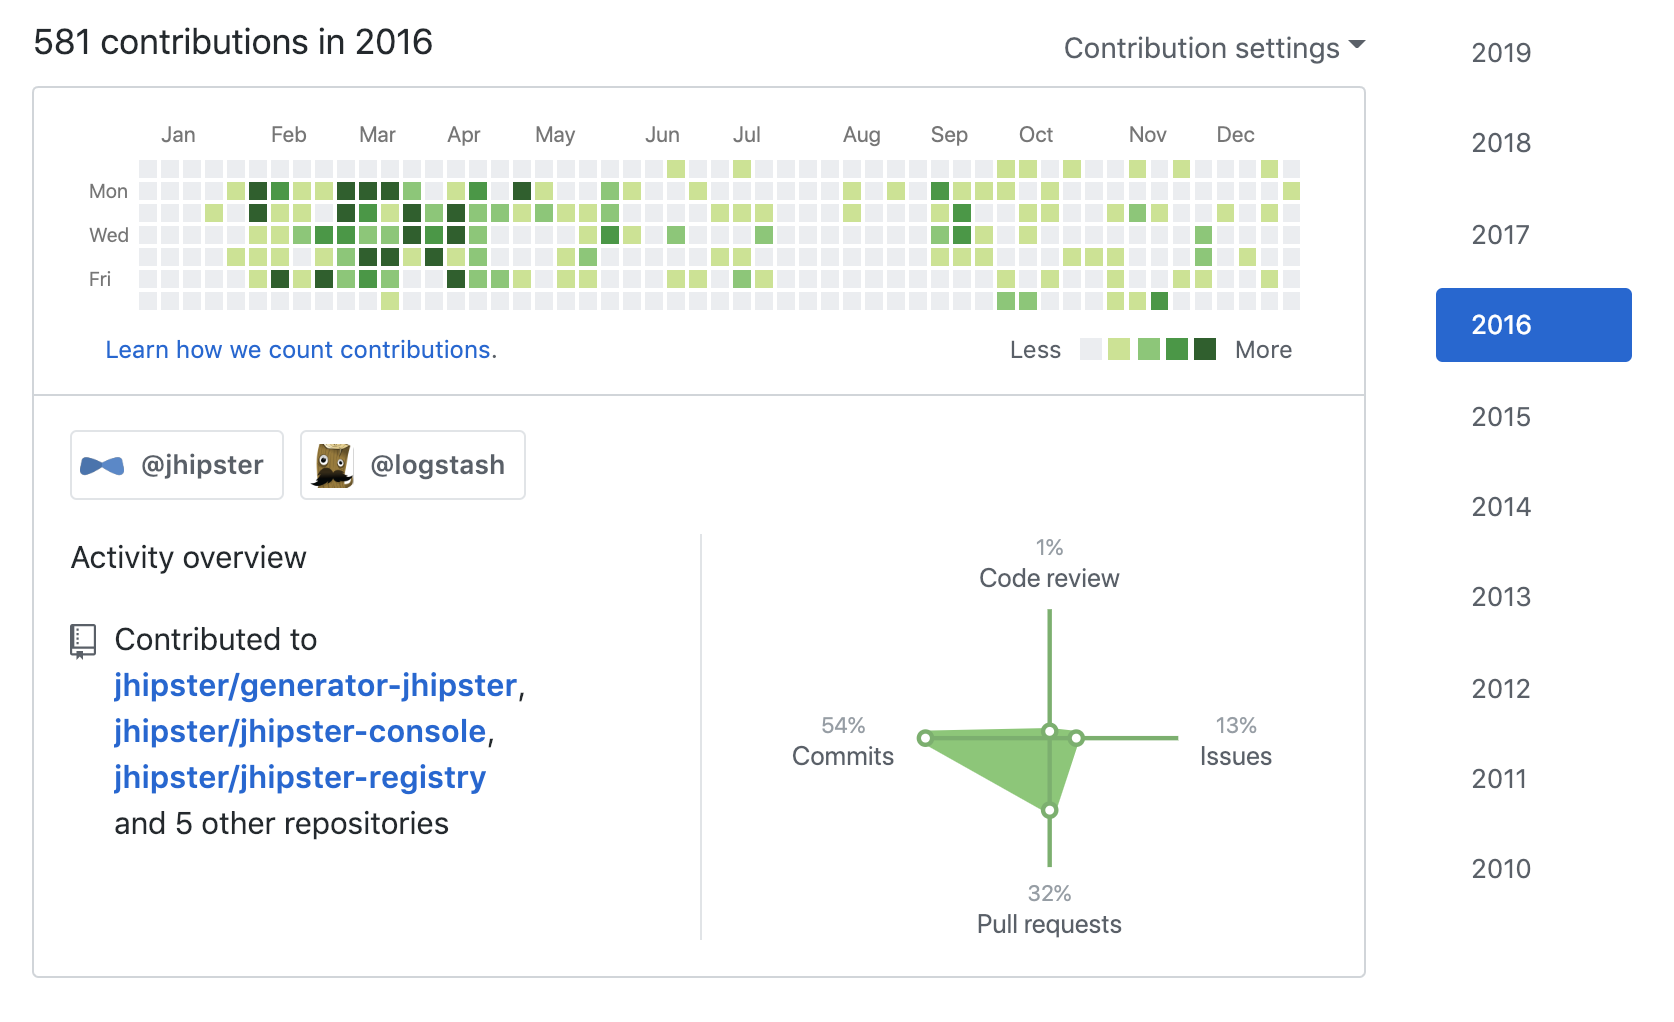 My contributions to open source in 2016